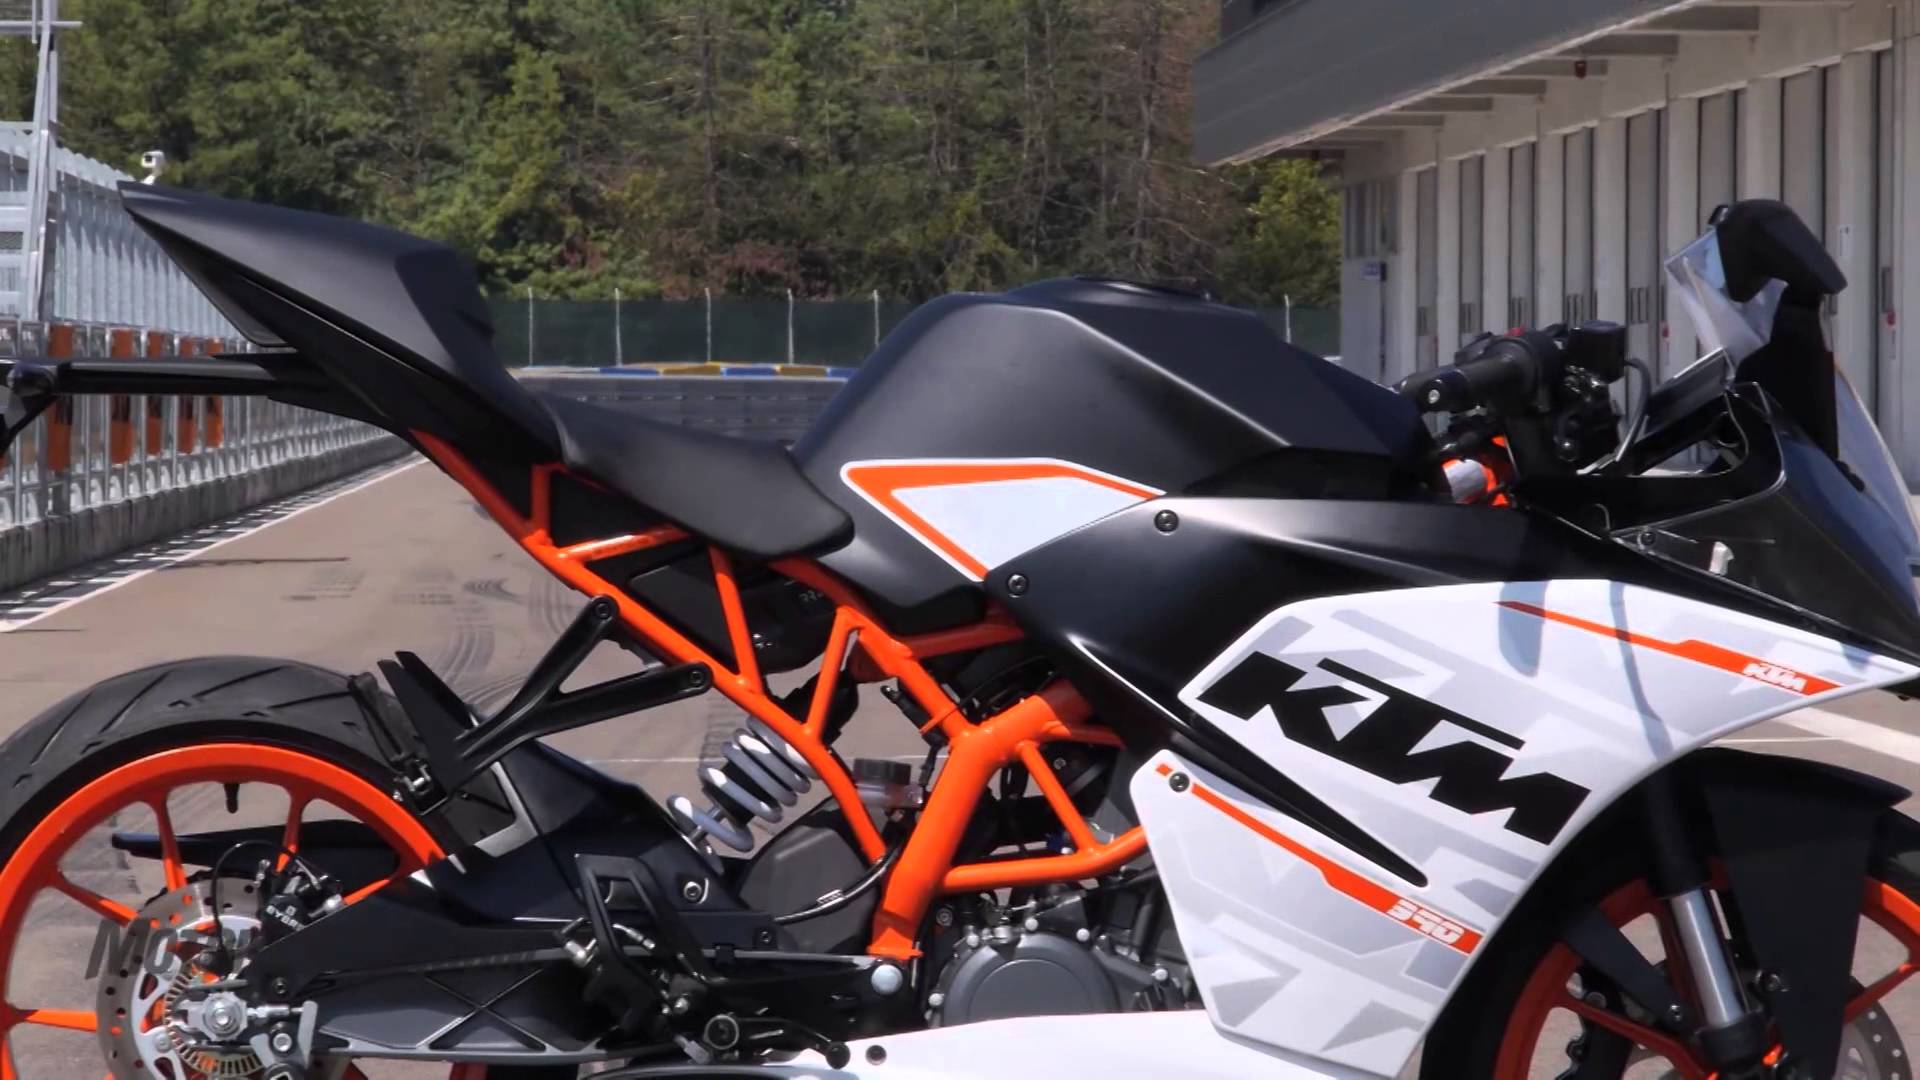 Ktm Rc 390 Photo and Wallpaper